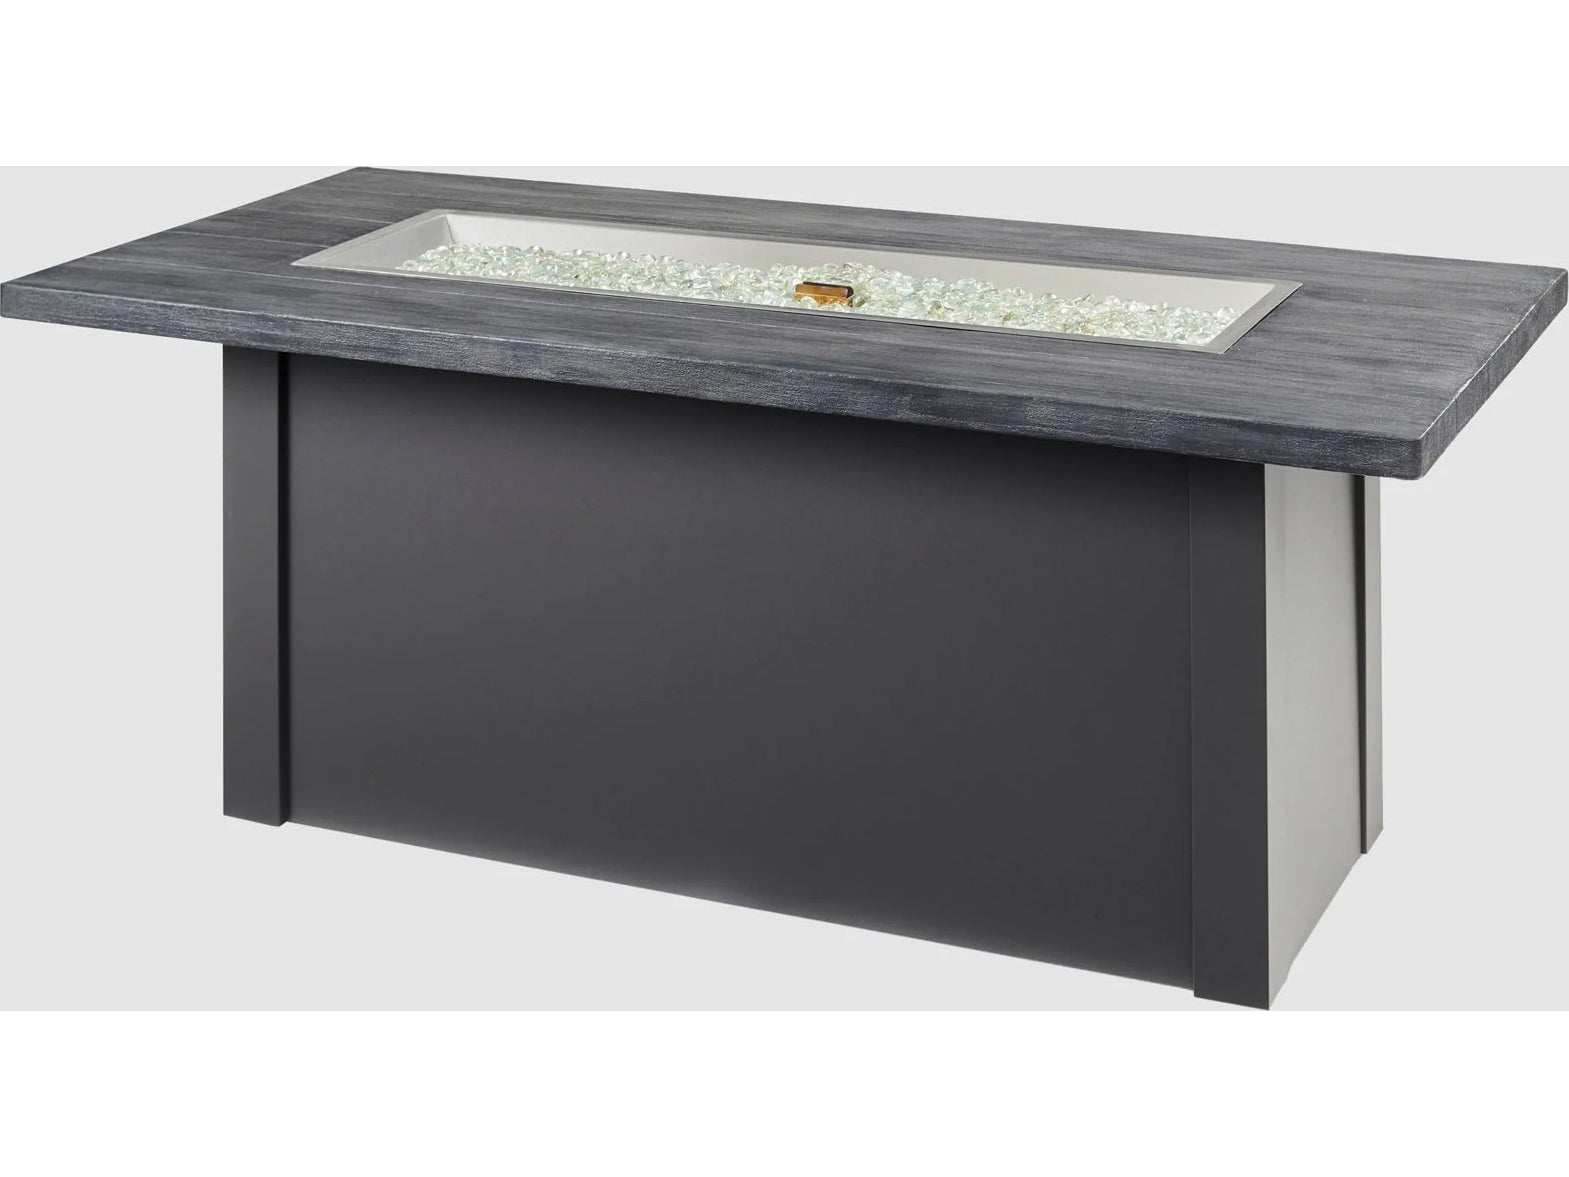 Outdoor Greatroom - 62’‘W x 30’'D - Havenwood Steel Graphite Grey Rectangular Carbon Grey Everblend Top Gas Fire Pit Table with Direct Spark Ignition